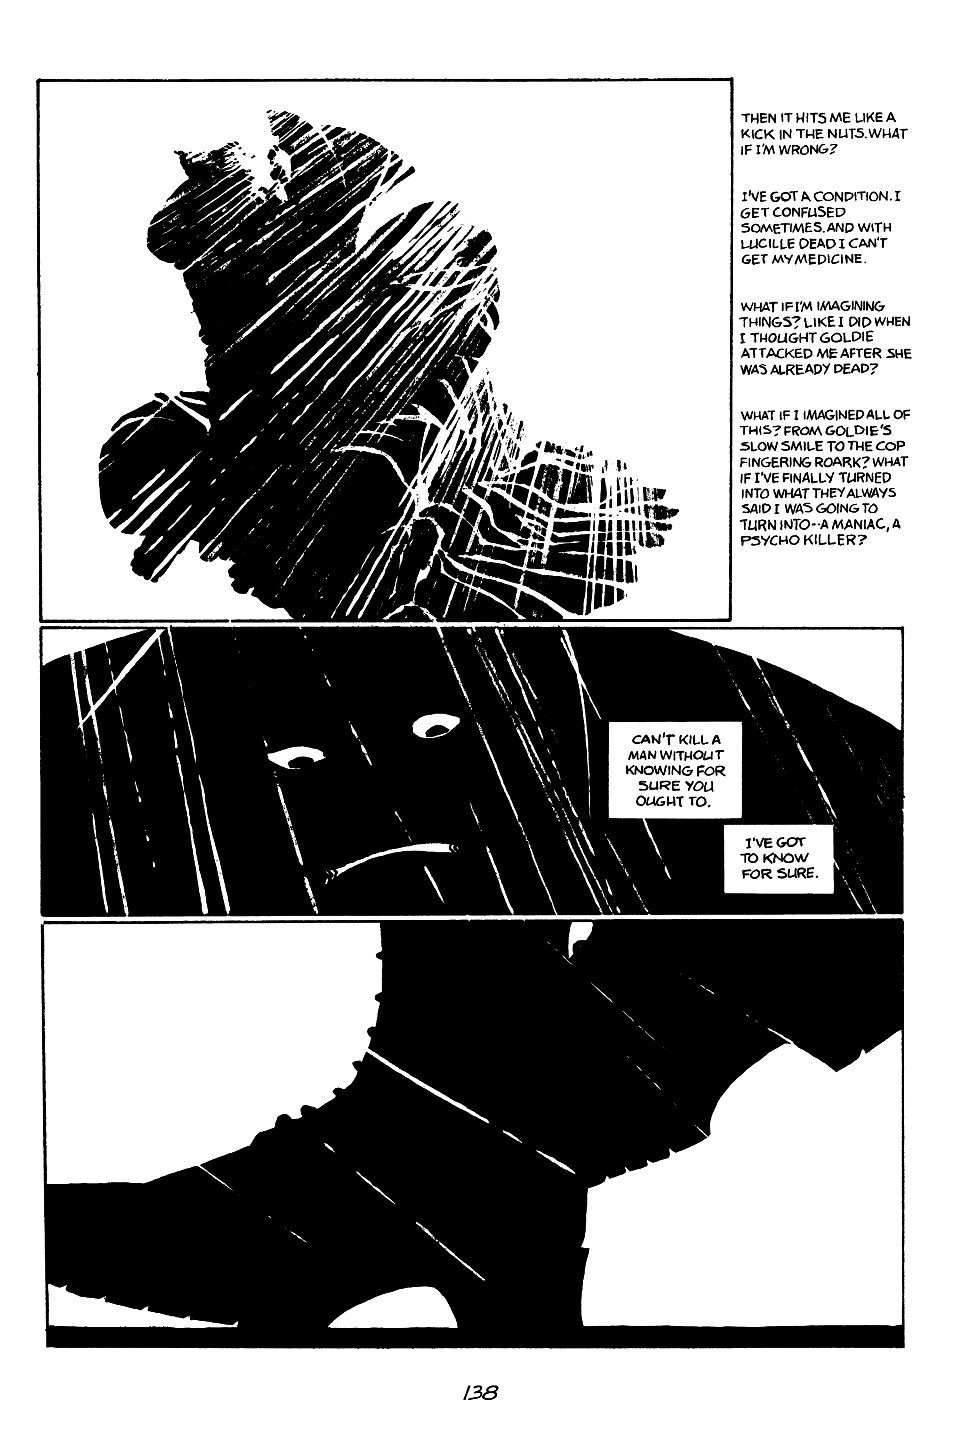 page 138 of sin city 1 the hard goodbye